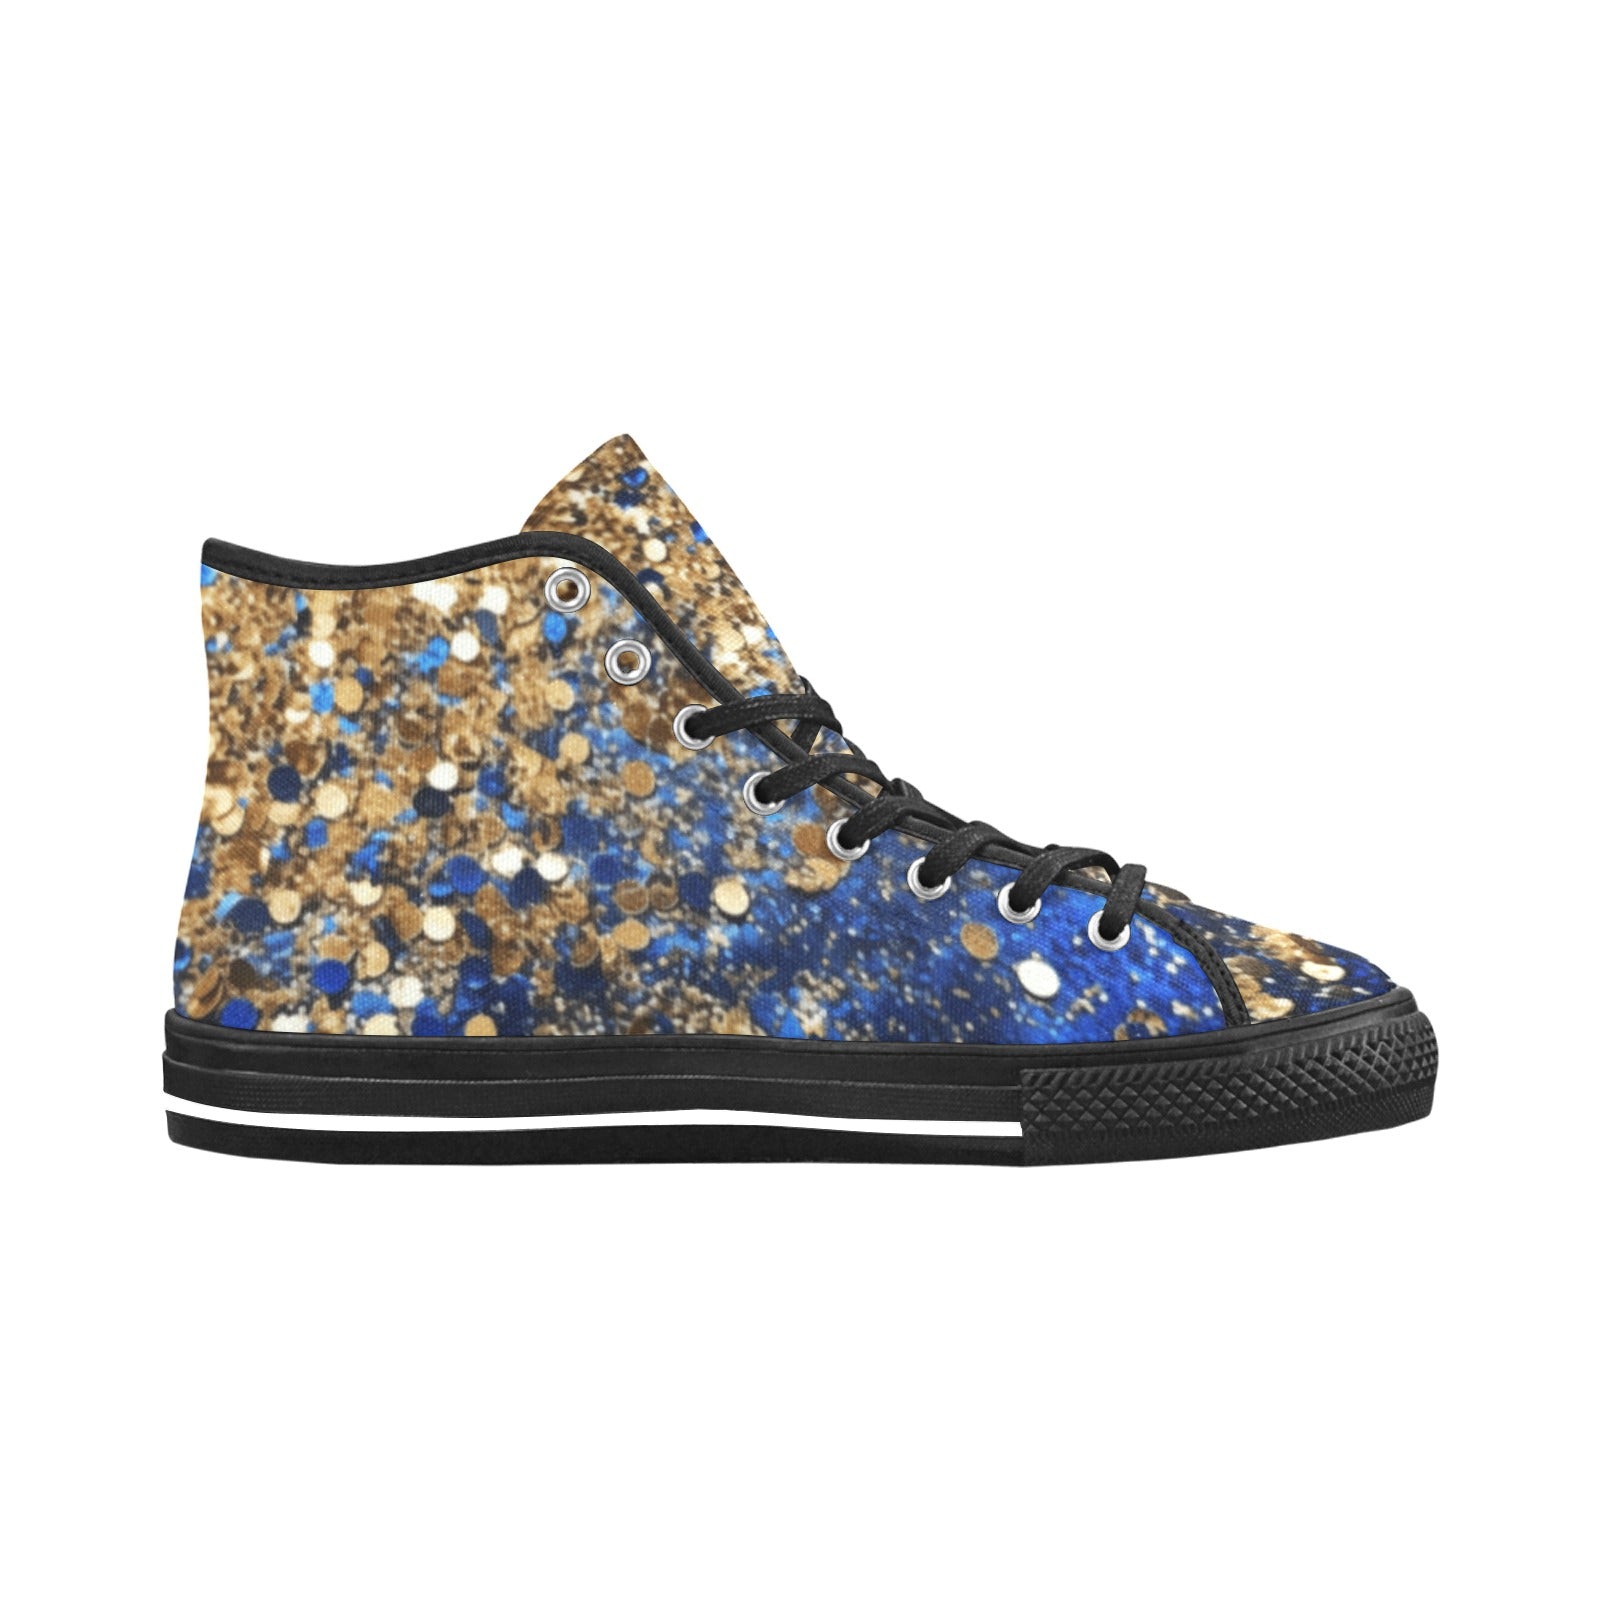 Stylish Blue & Gold Pixel Vancouver High Top Canvas Shoes - Women's Lace-Up Fashion Sneakers - All-Over Print